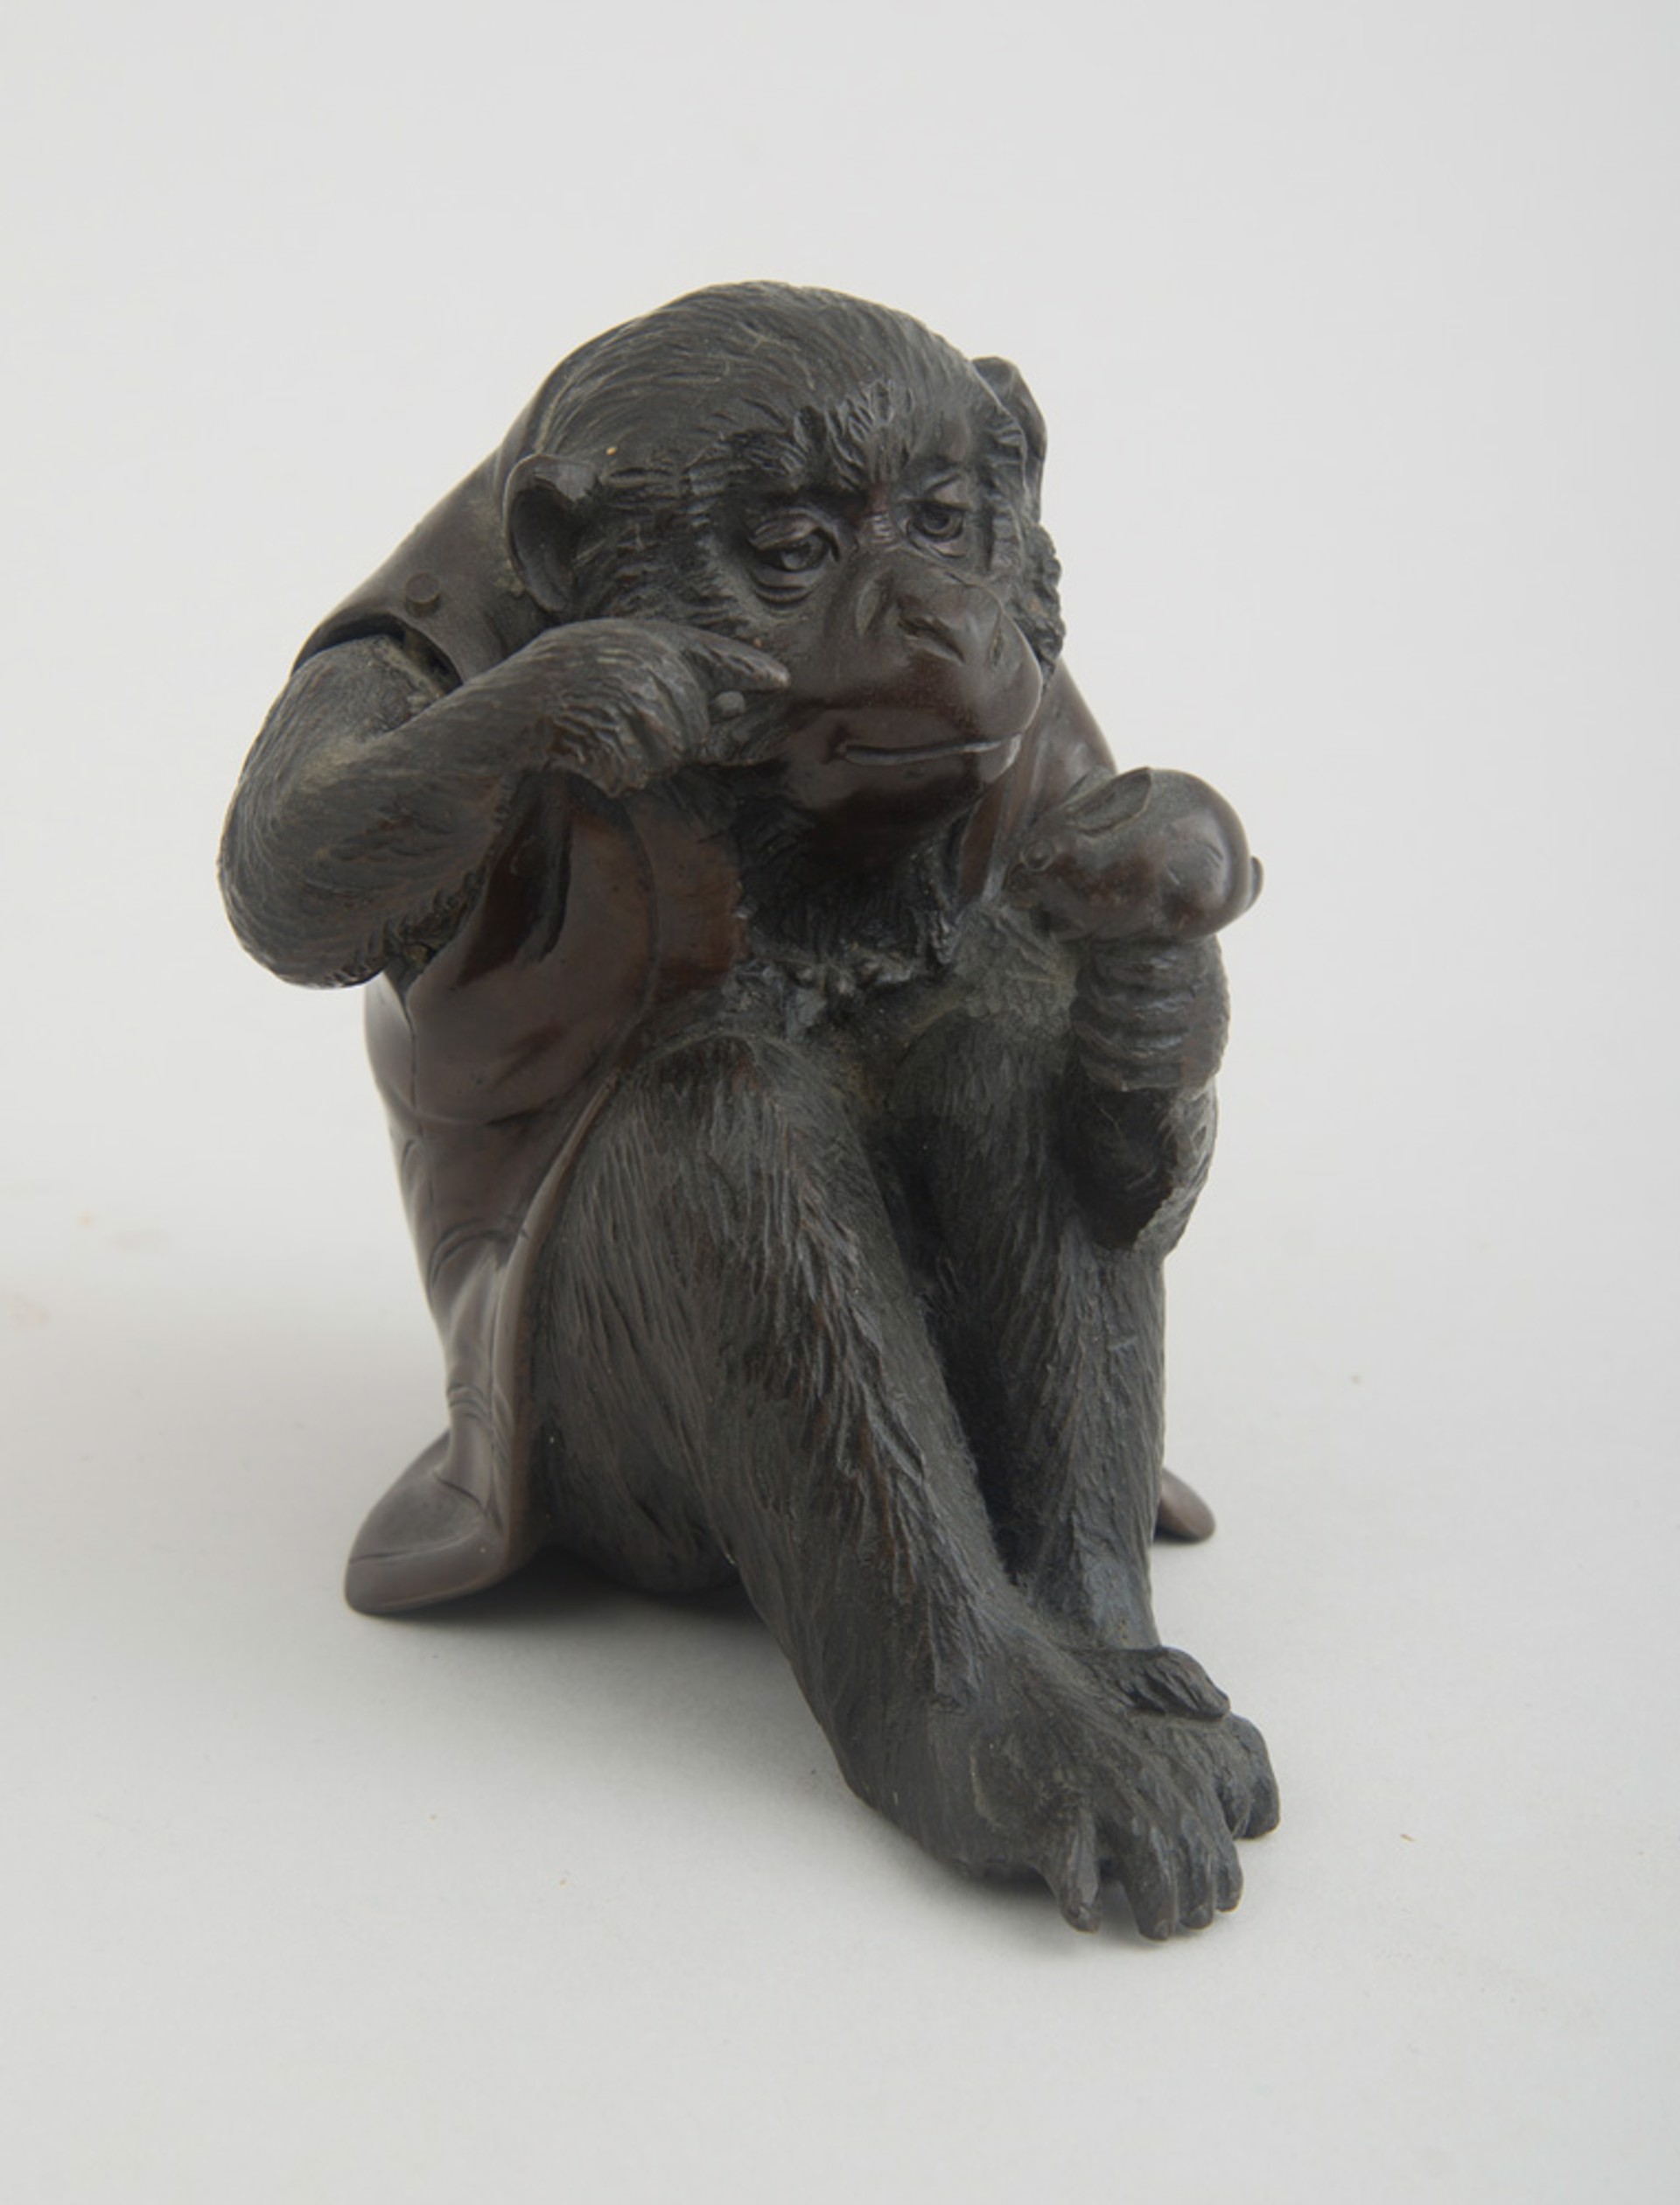 JAPANESE BRONZE FIGURE OF A SEATED SNOW MONKEY